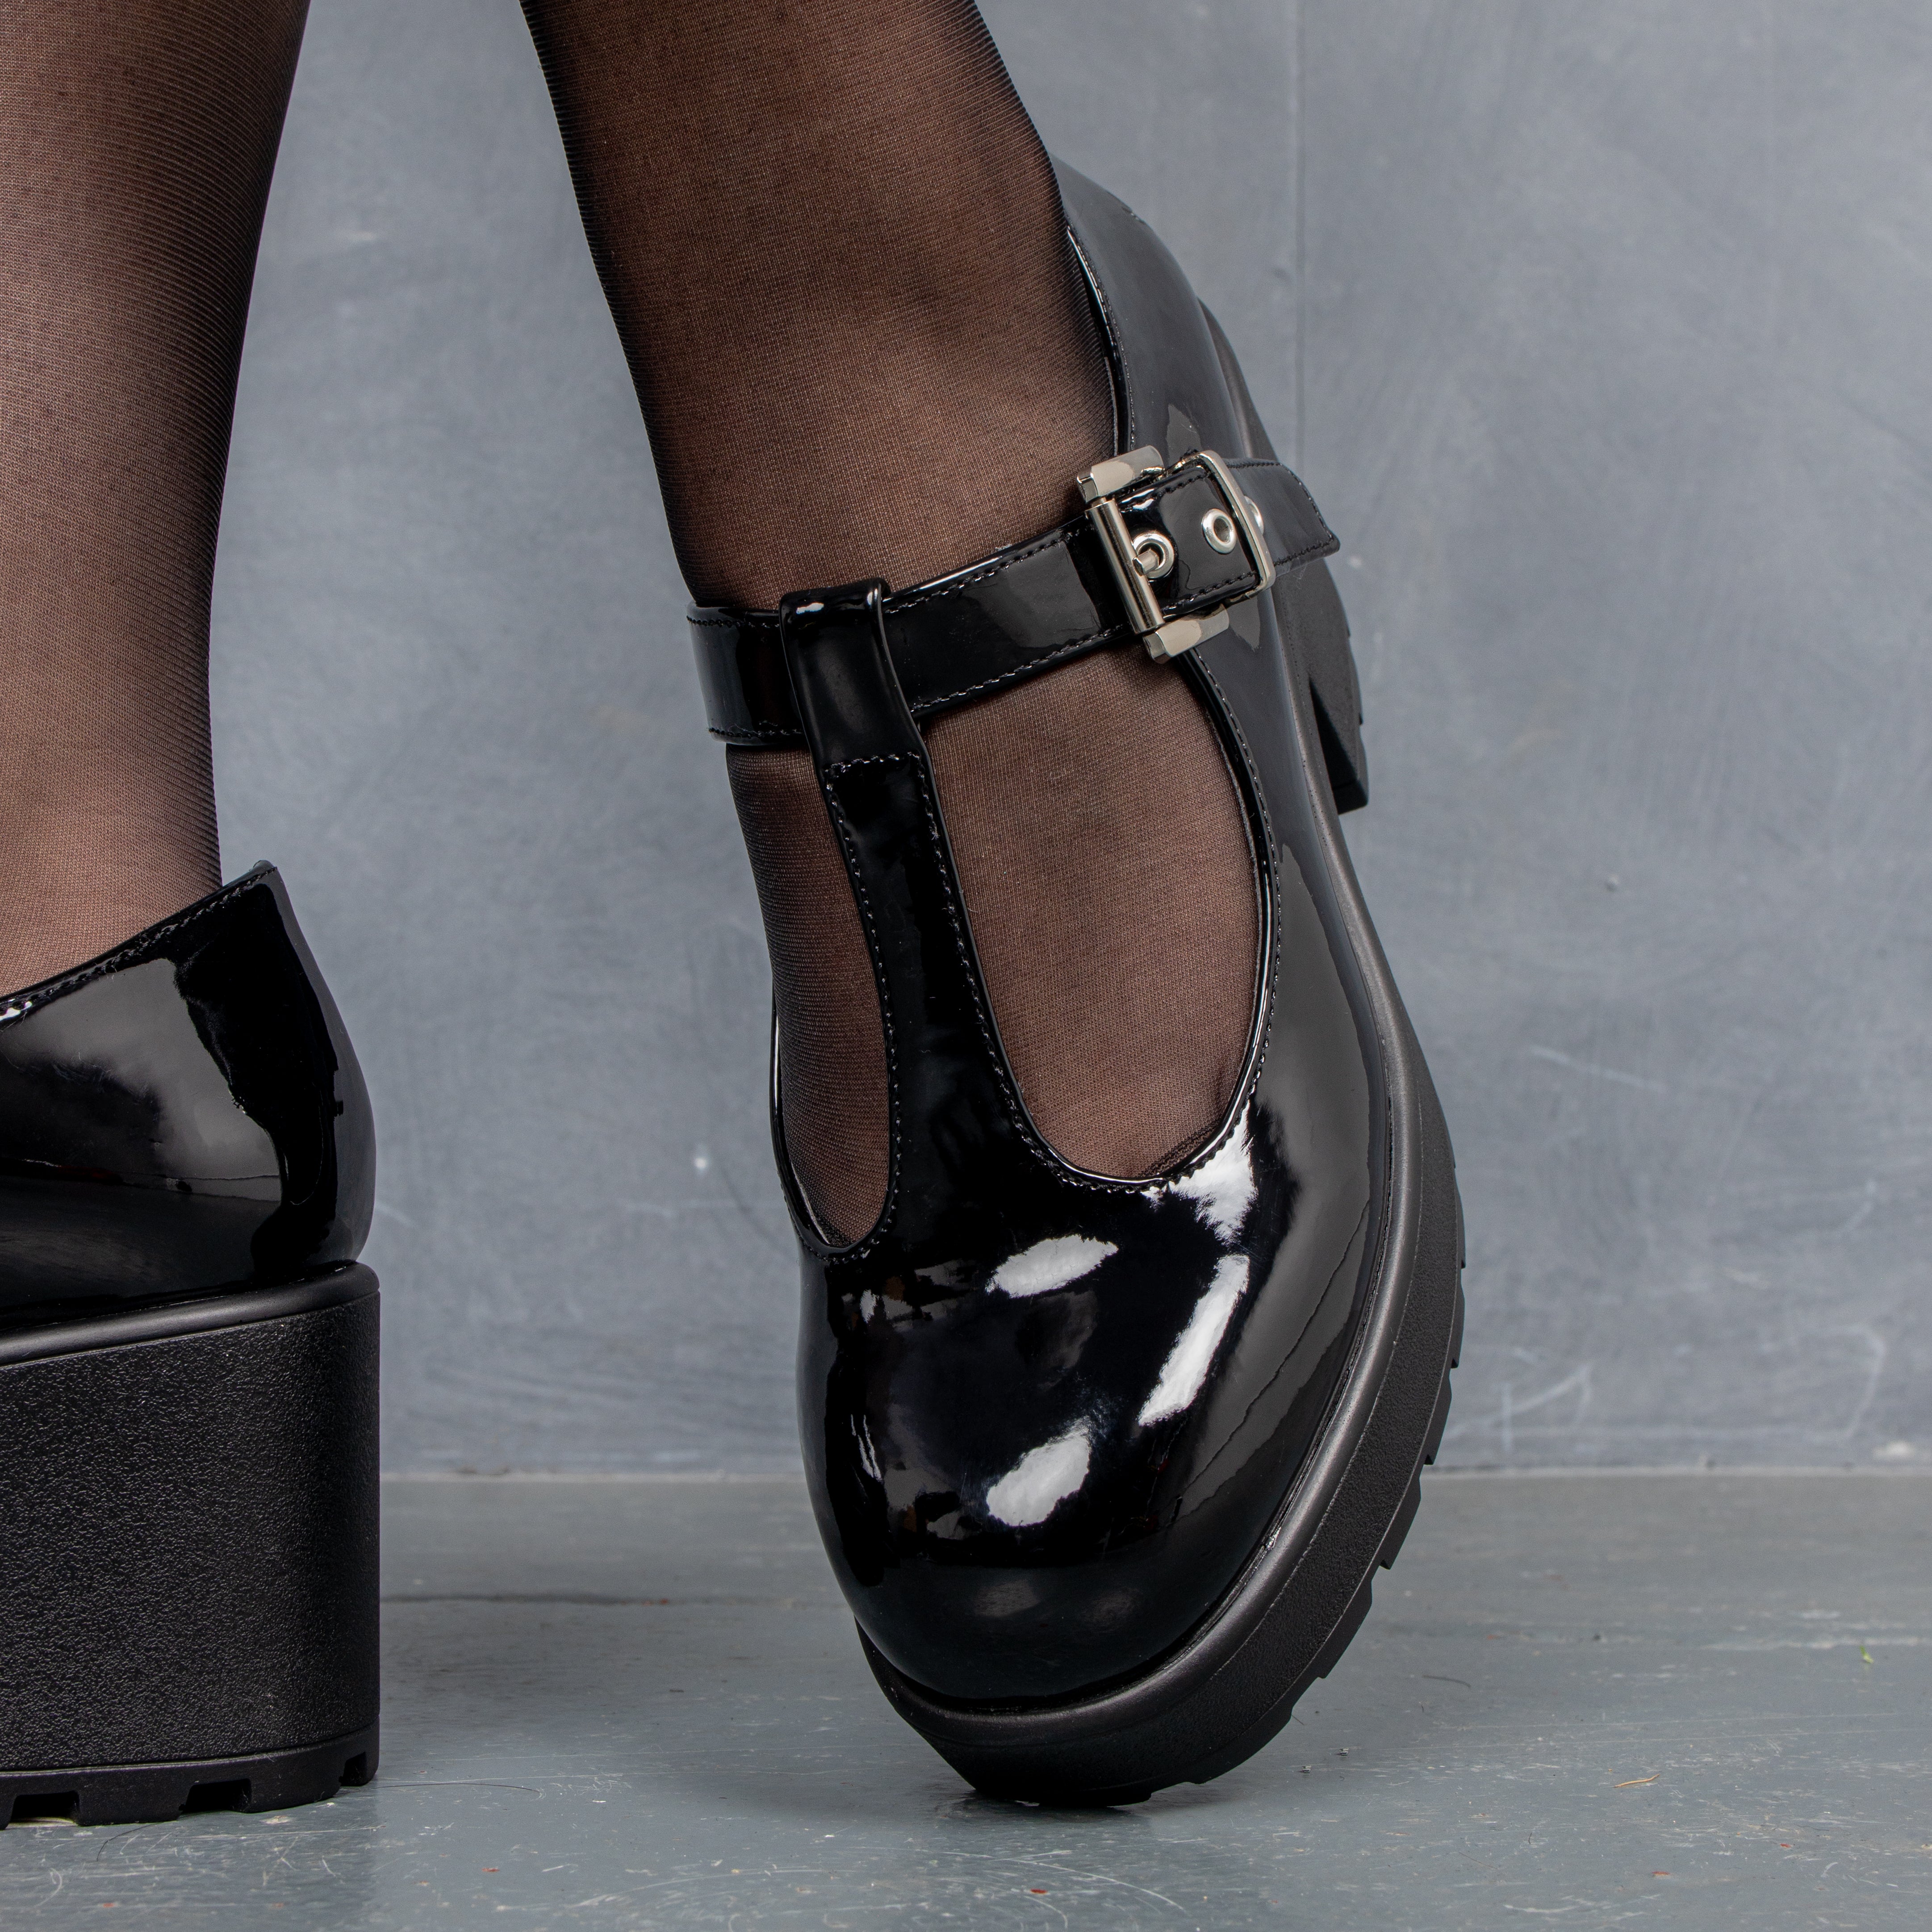 The Best Mary Jane Shoes to Buy in 2023